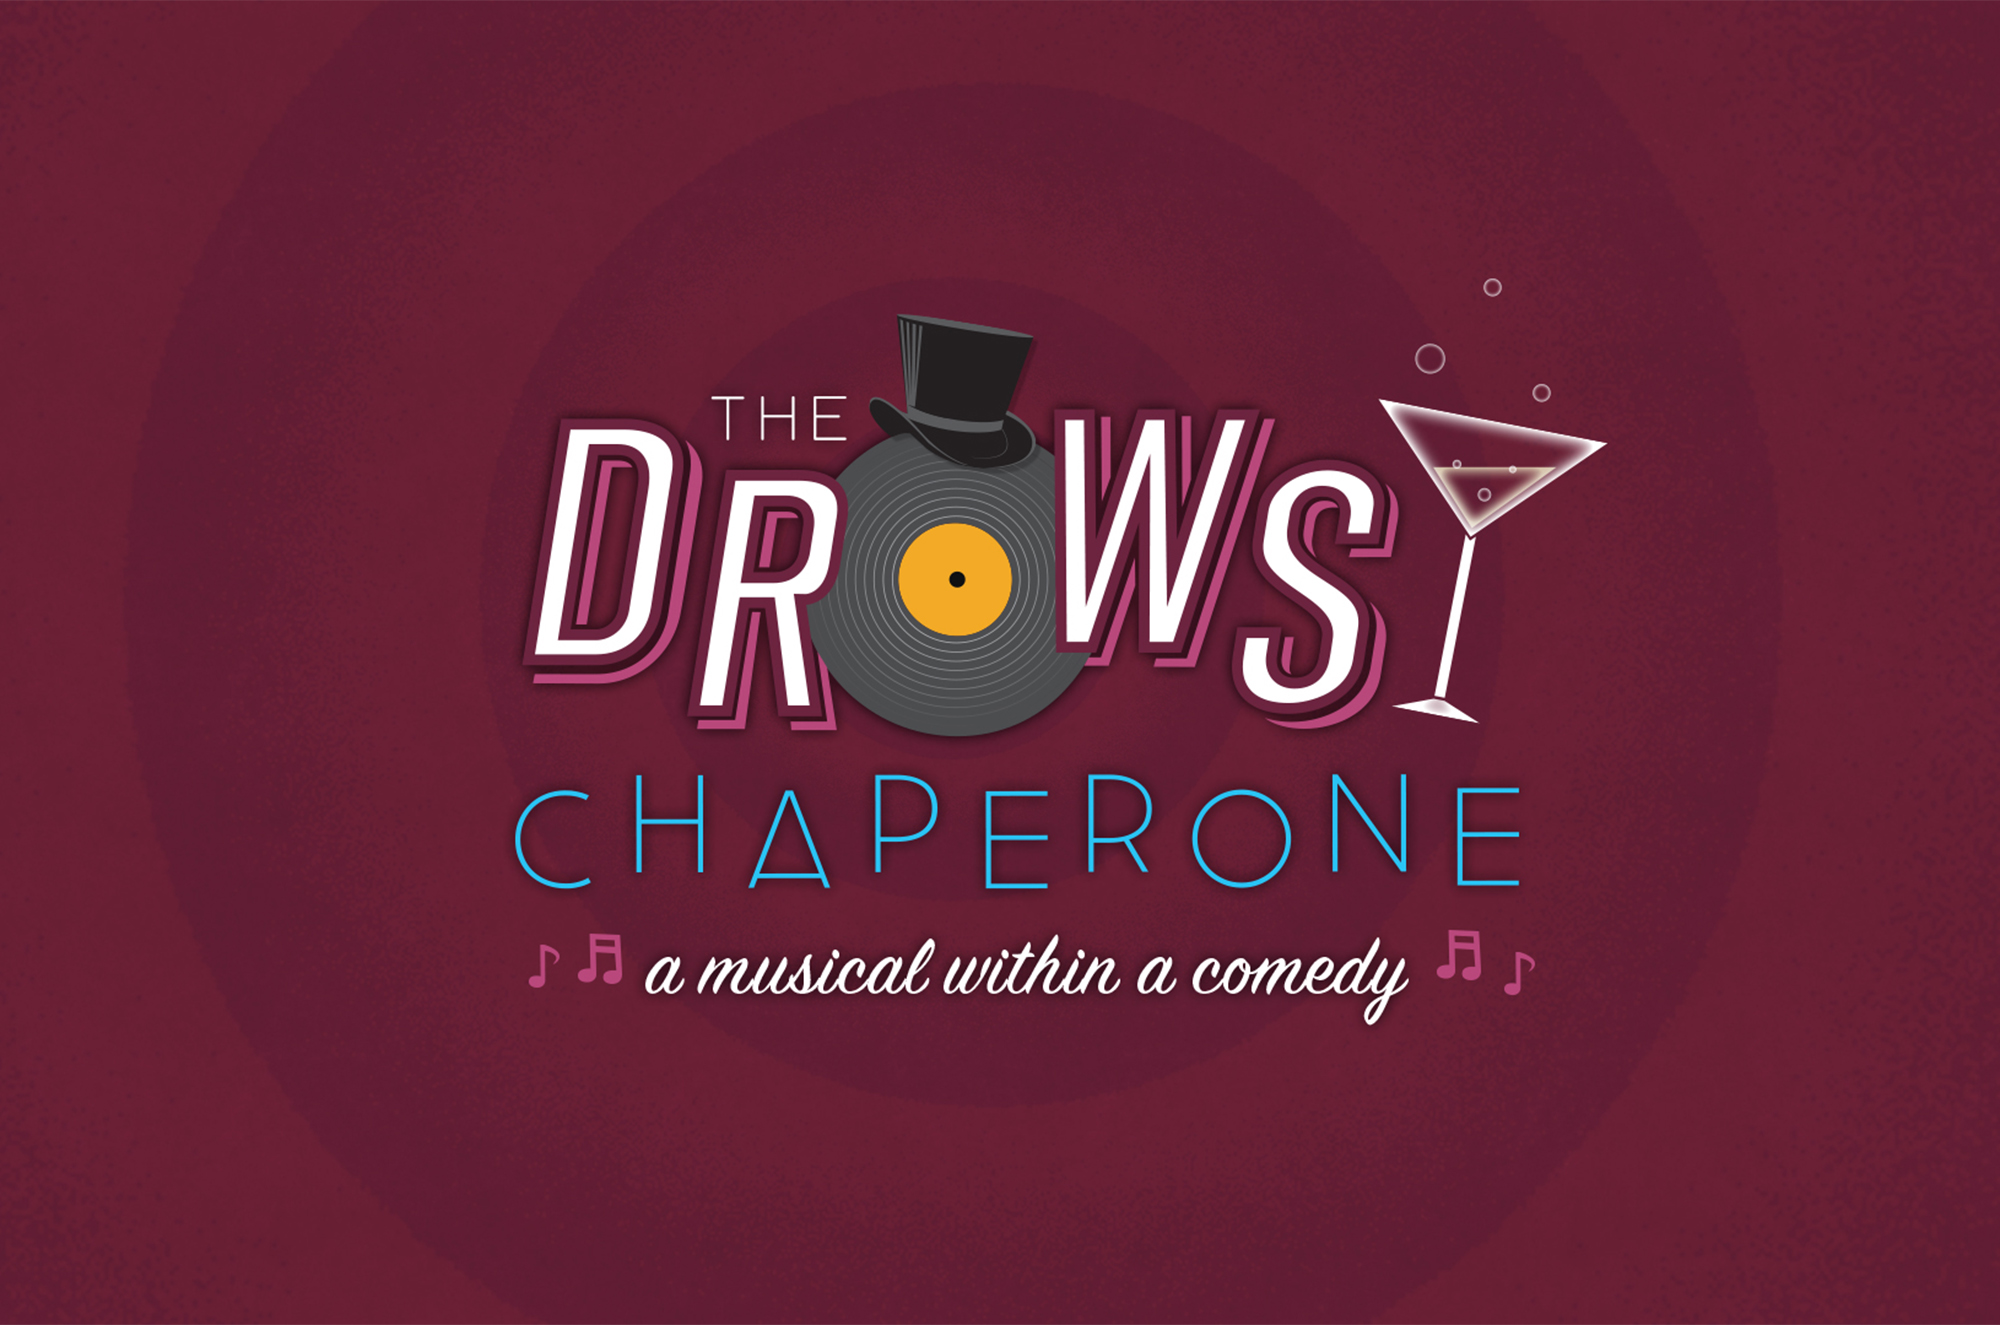 show off drowsy chaperone